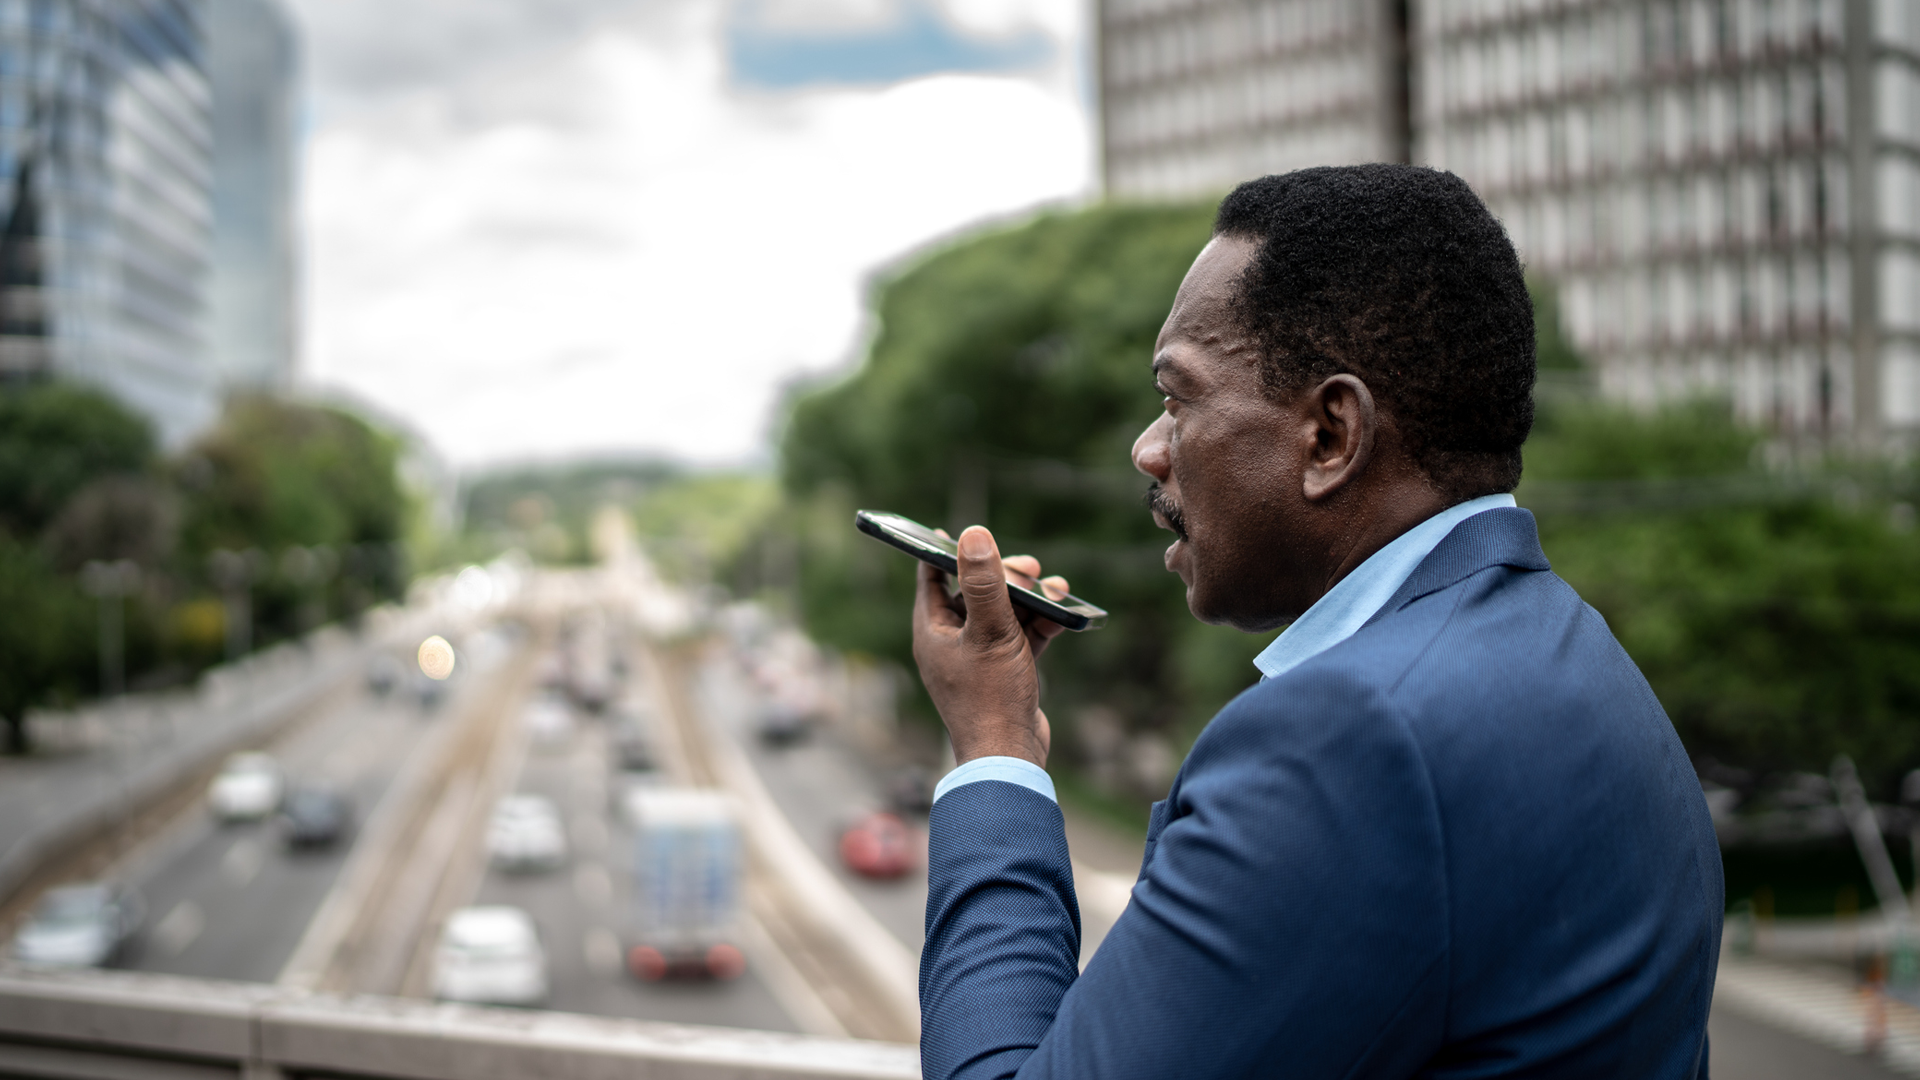 Man in suit using phone with city traffic in background.